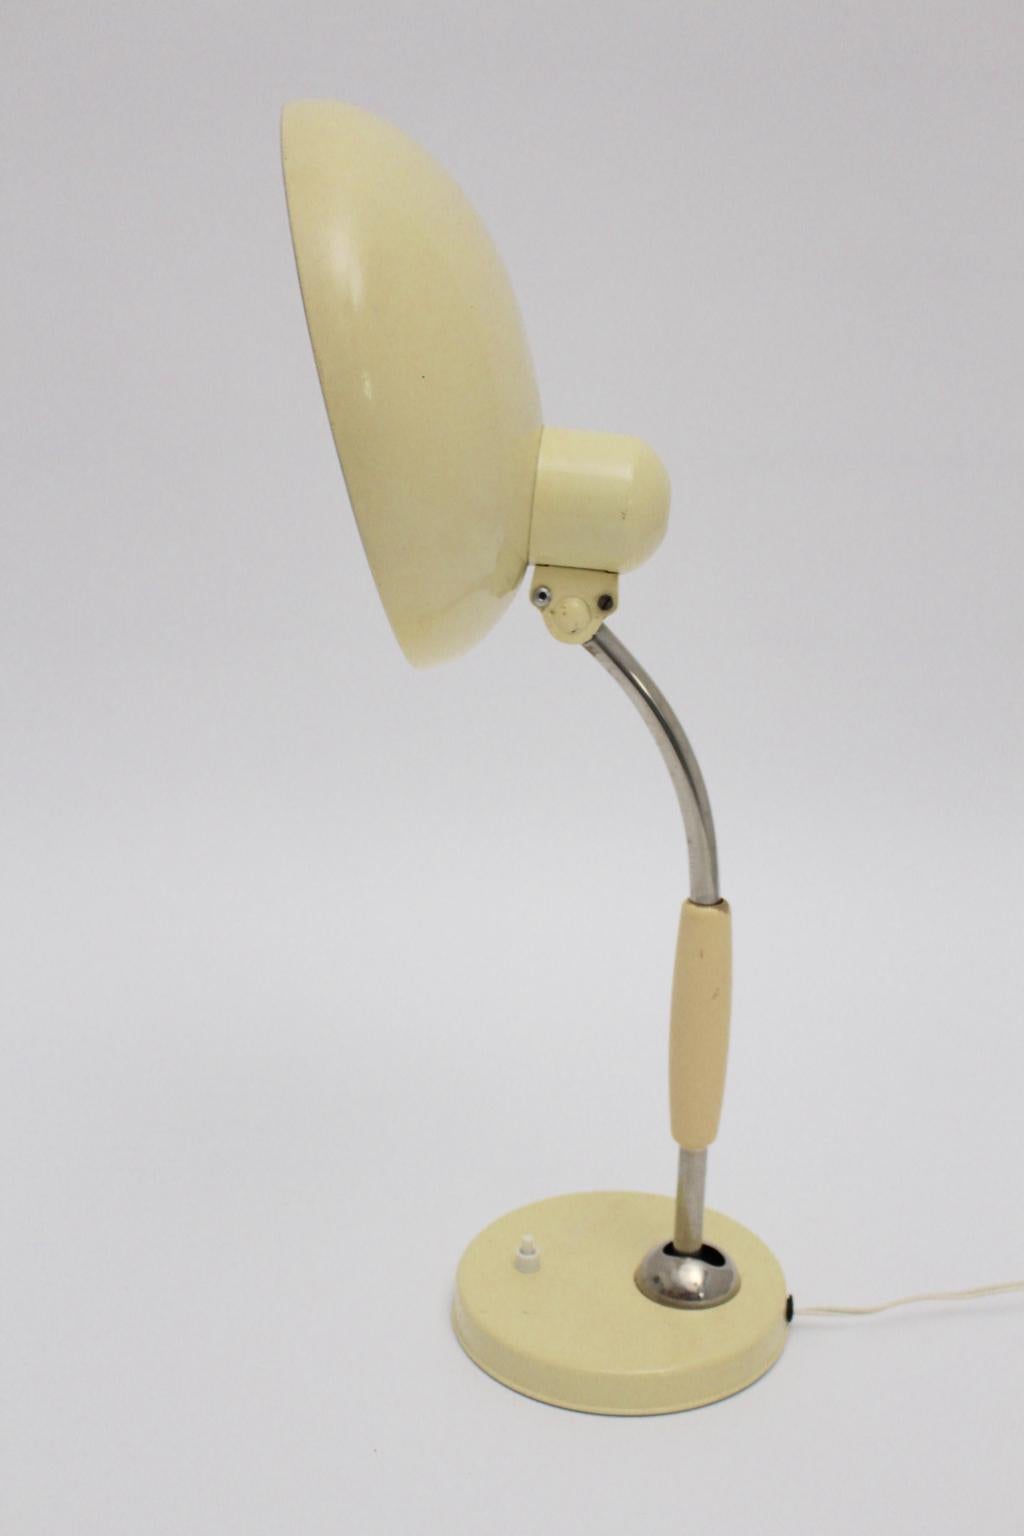 Bauhaus Vintage off White Metal Wood Table Lamp TL 322 Christian Dell, 1933 In Good Condition For Sale In Vienna, AT